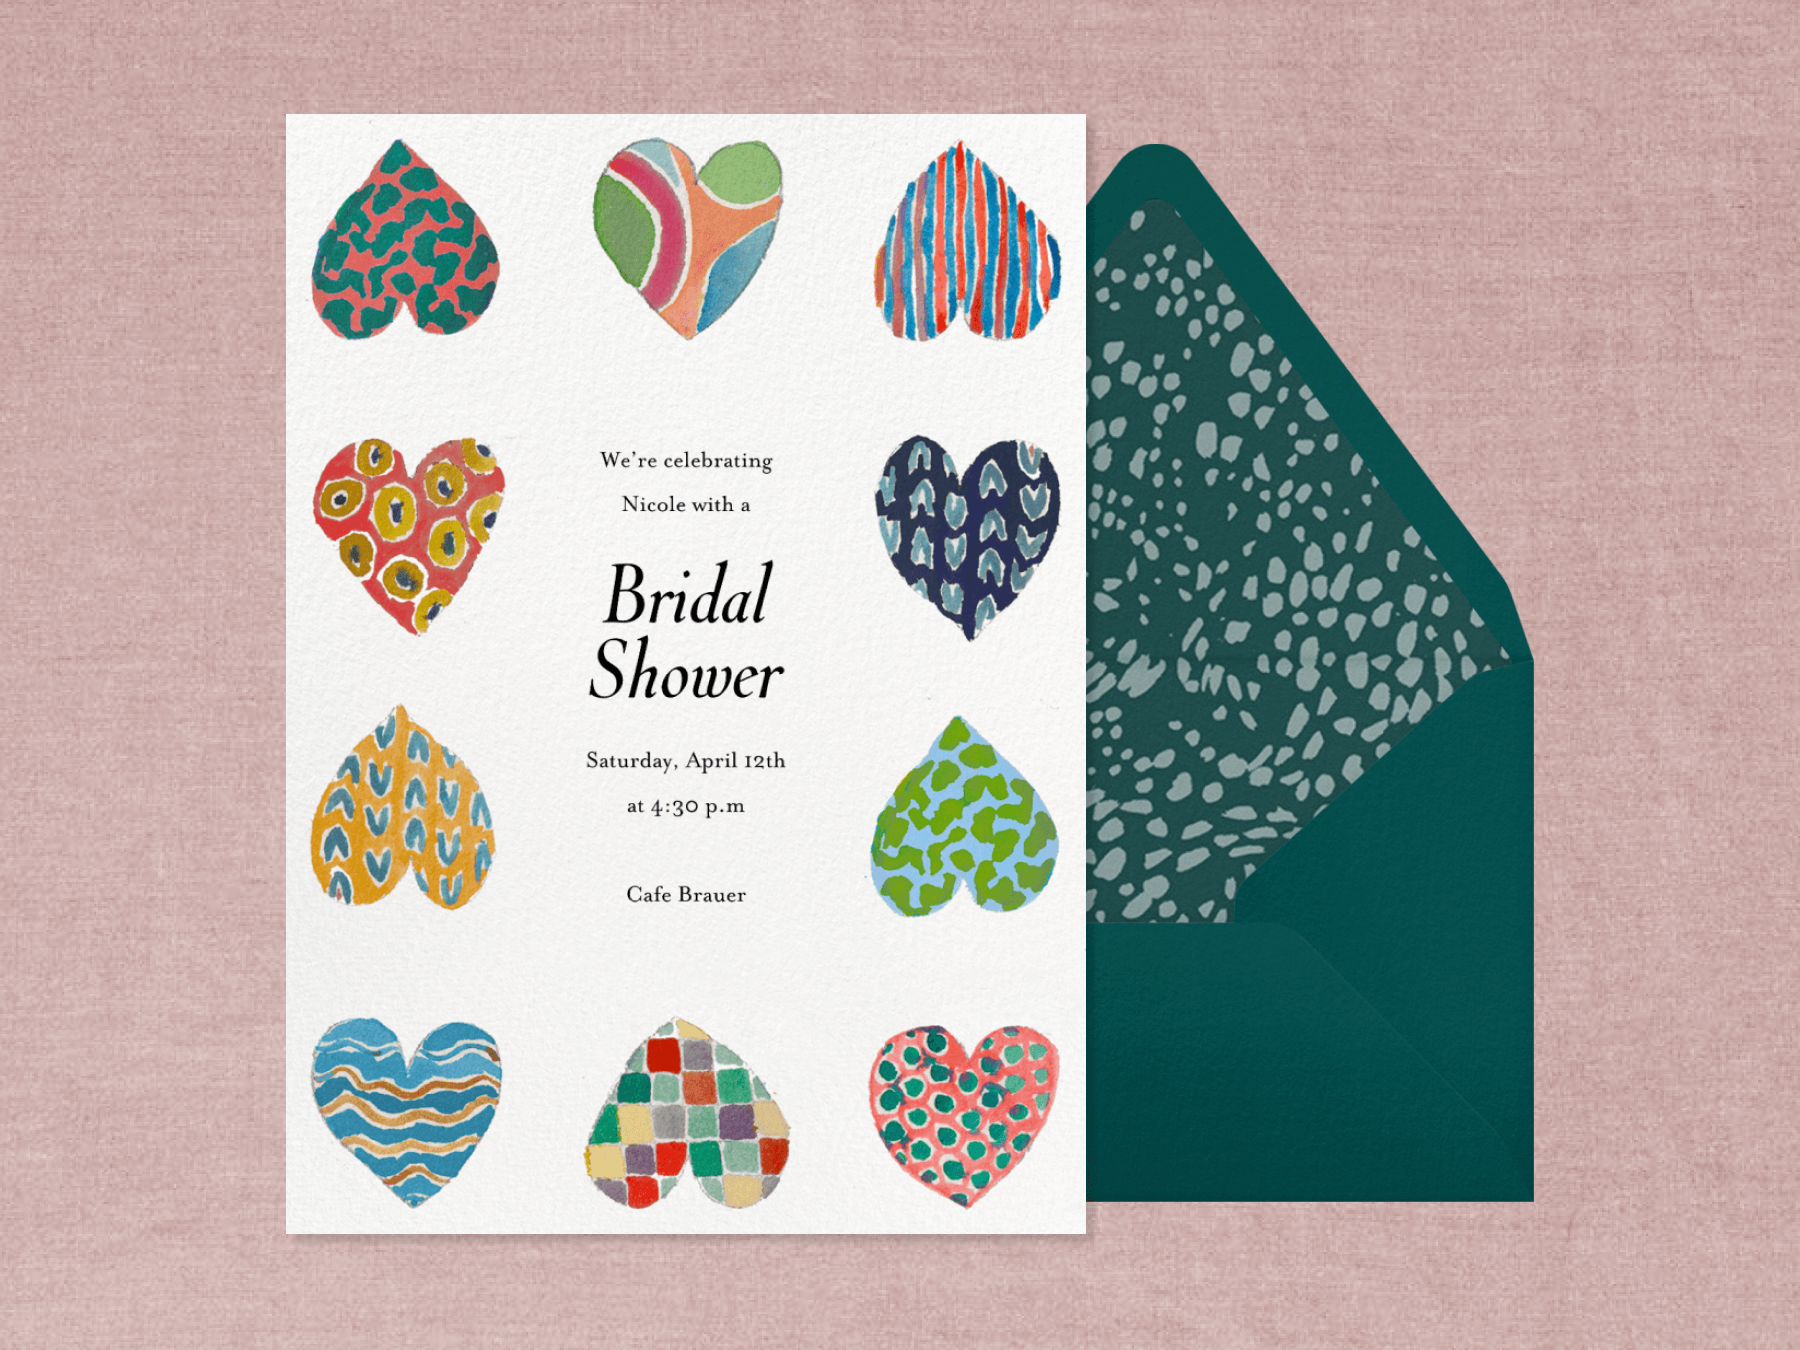 A bridal shower invitation with a border of 10 colorful, multi-patterned hearts in varying positions beside a forest green envelope on a pink textured background.